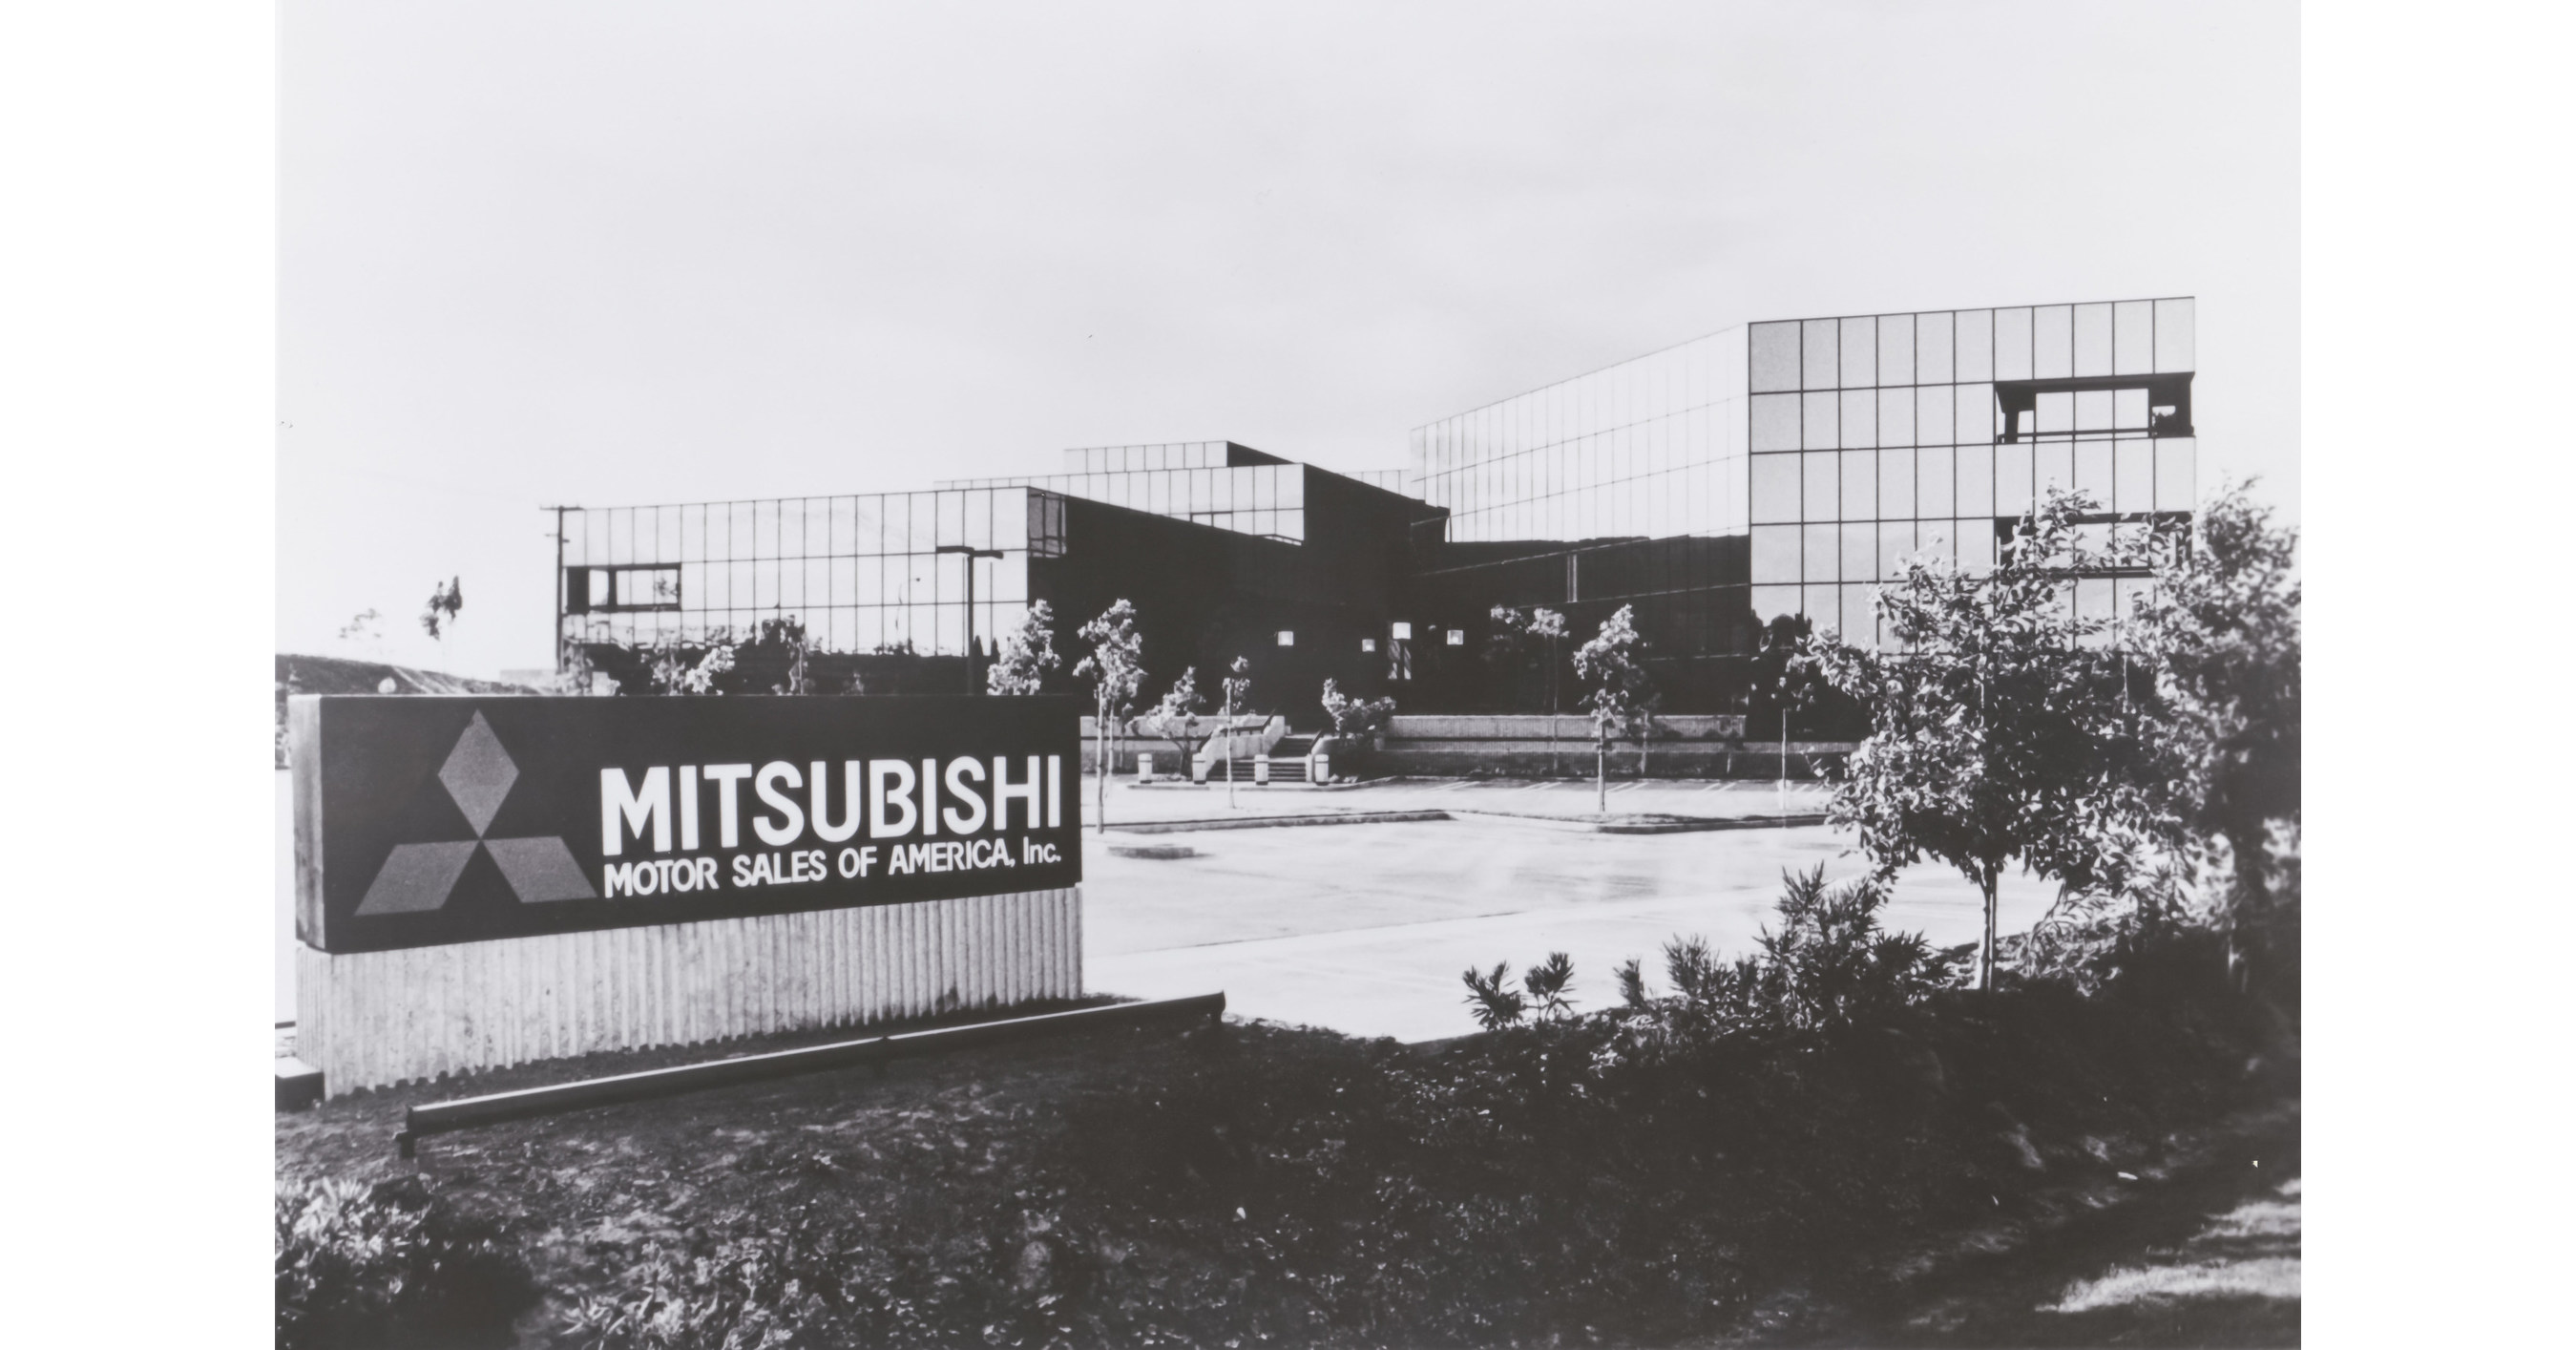 Mitsubishi Motors: Driving Ambition For 40 Years In The U.S.